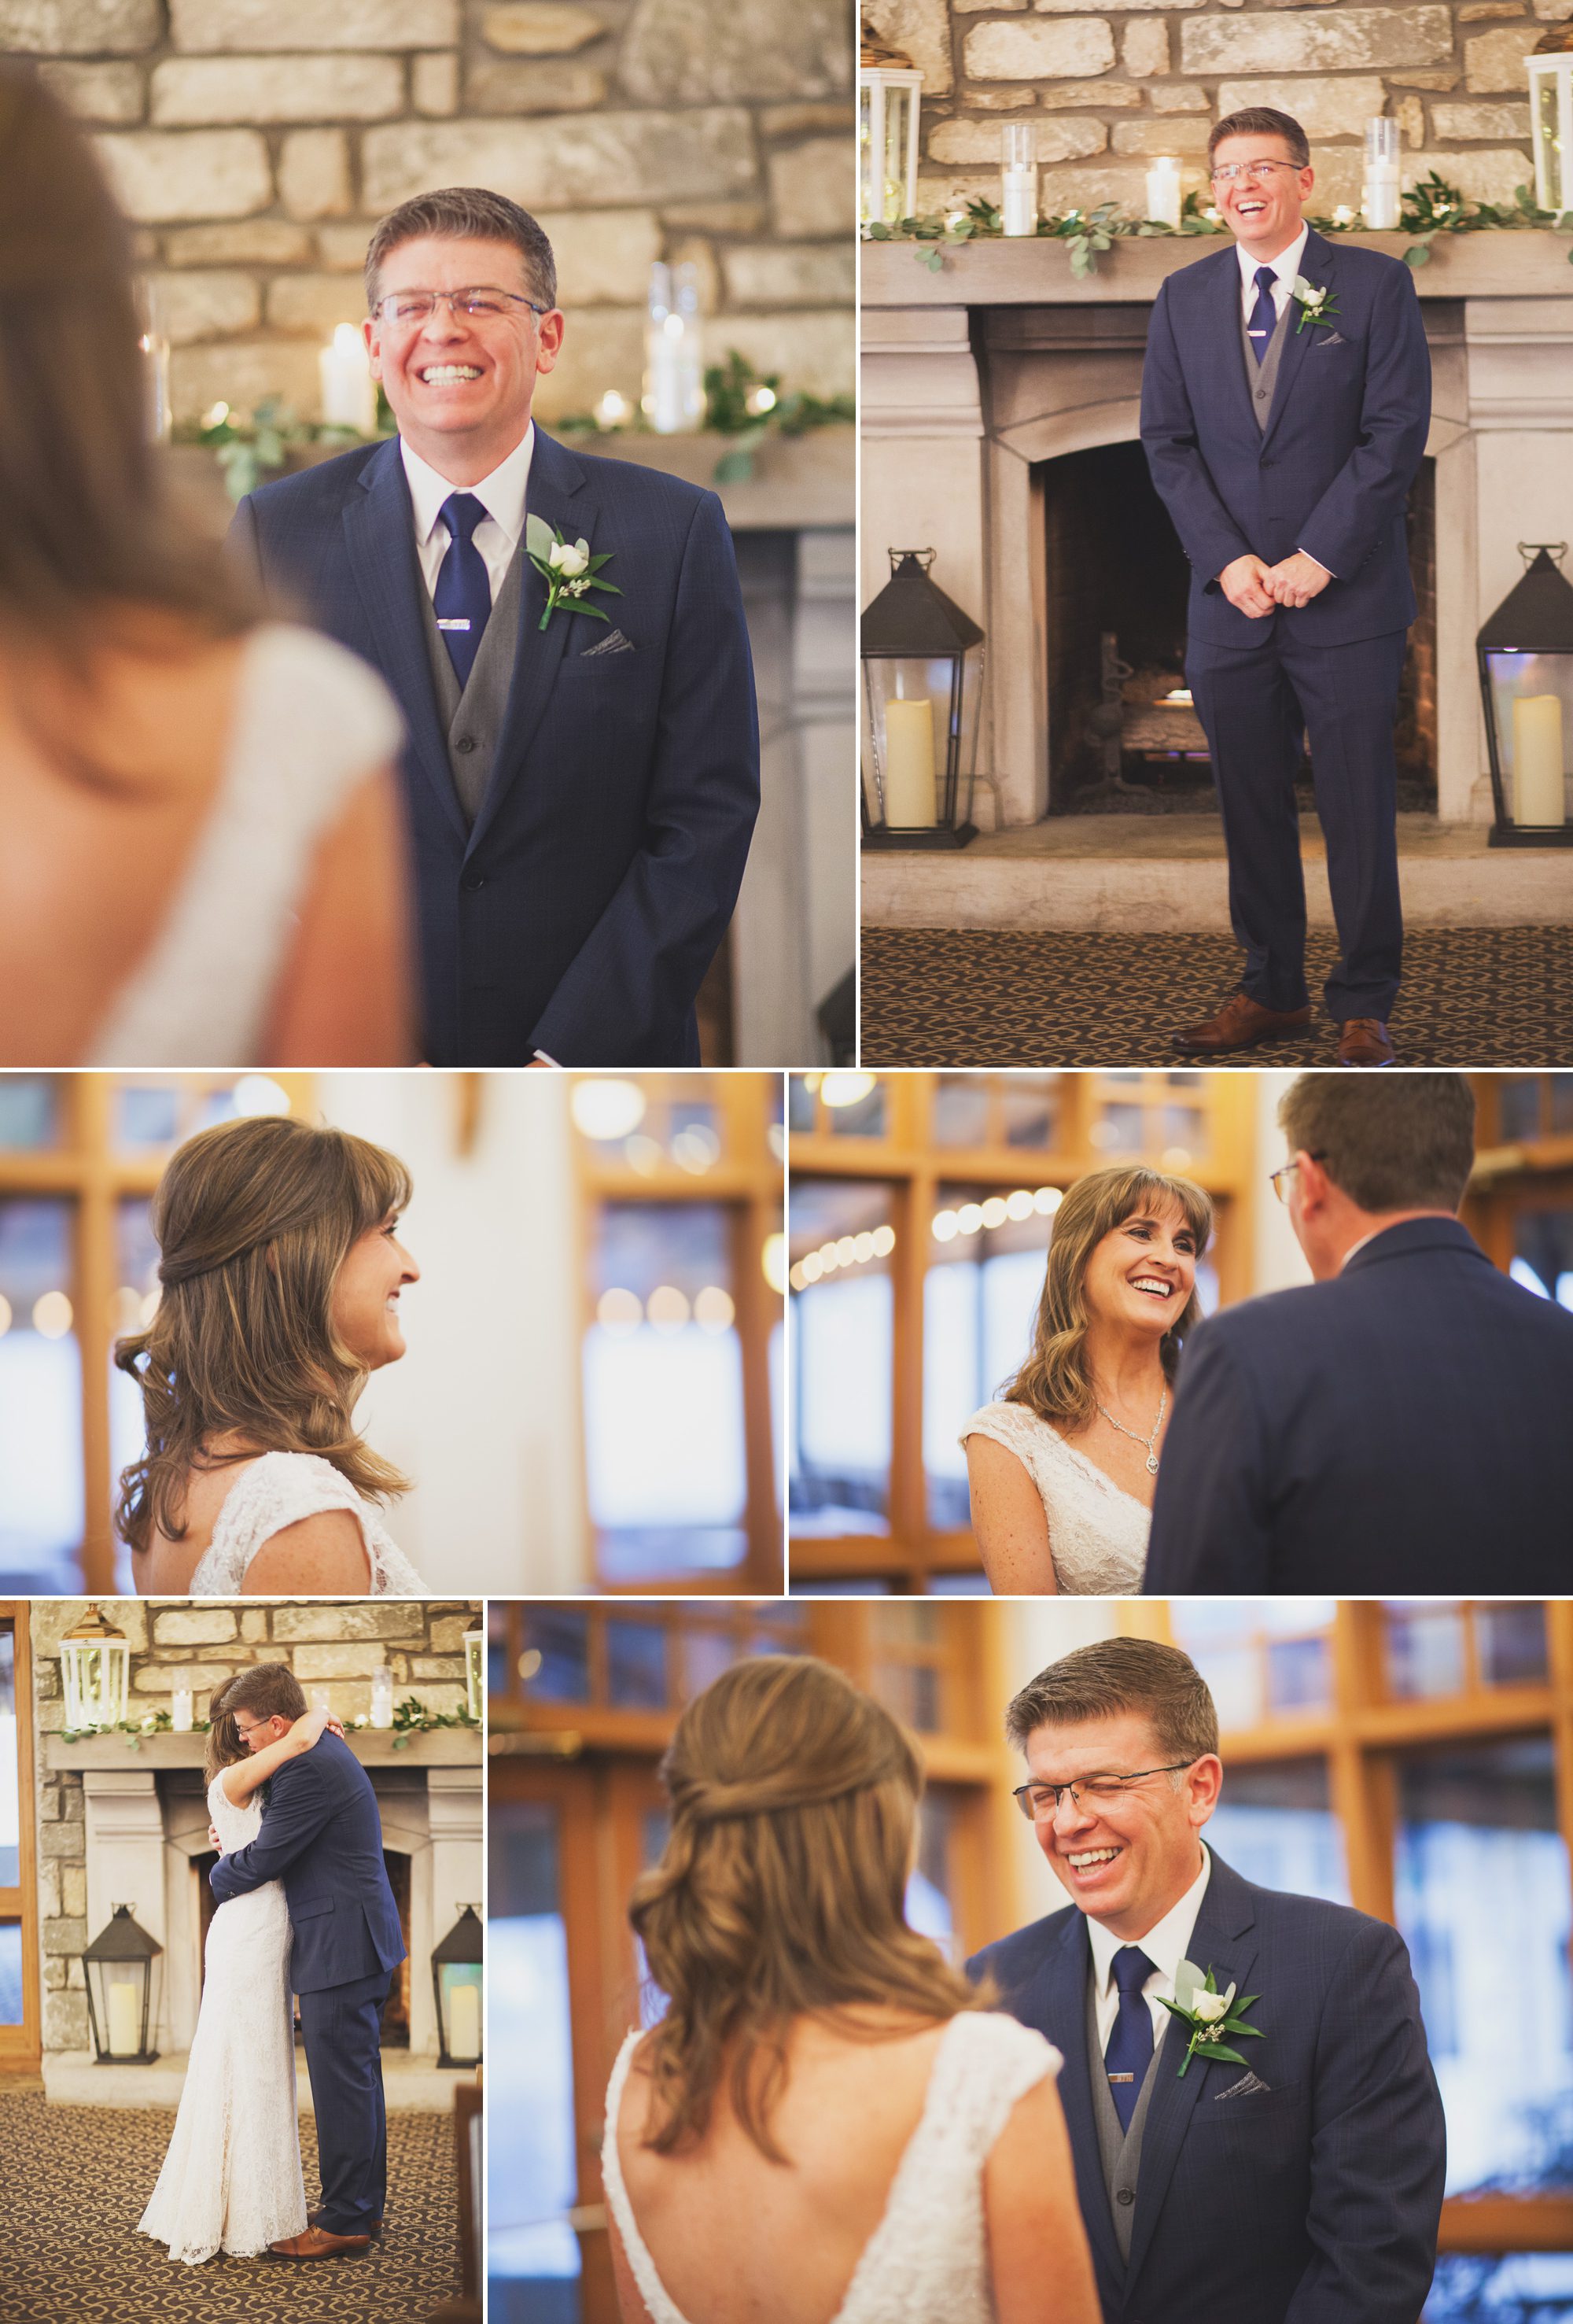 First look in front of mantle in clubhouse. Winter wedding at Vanderbilt Legends Golf Course in Brentwood TN, photos by Krista Lee Photography